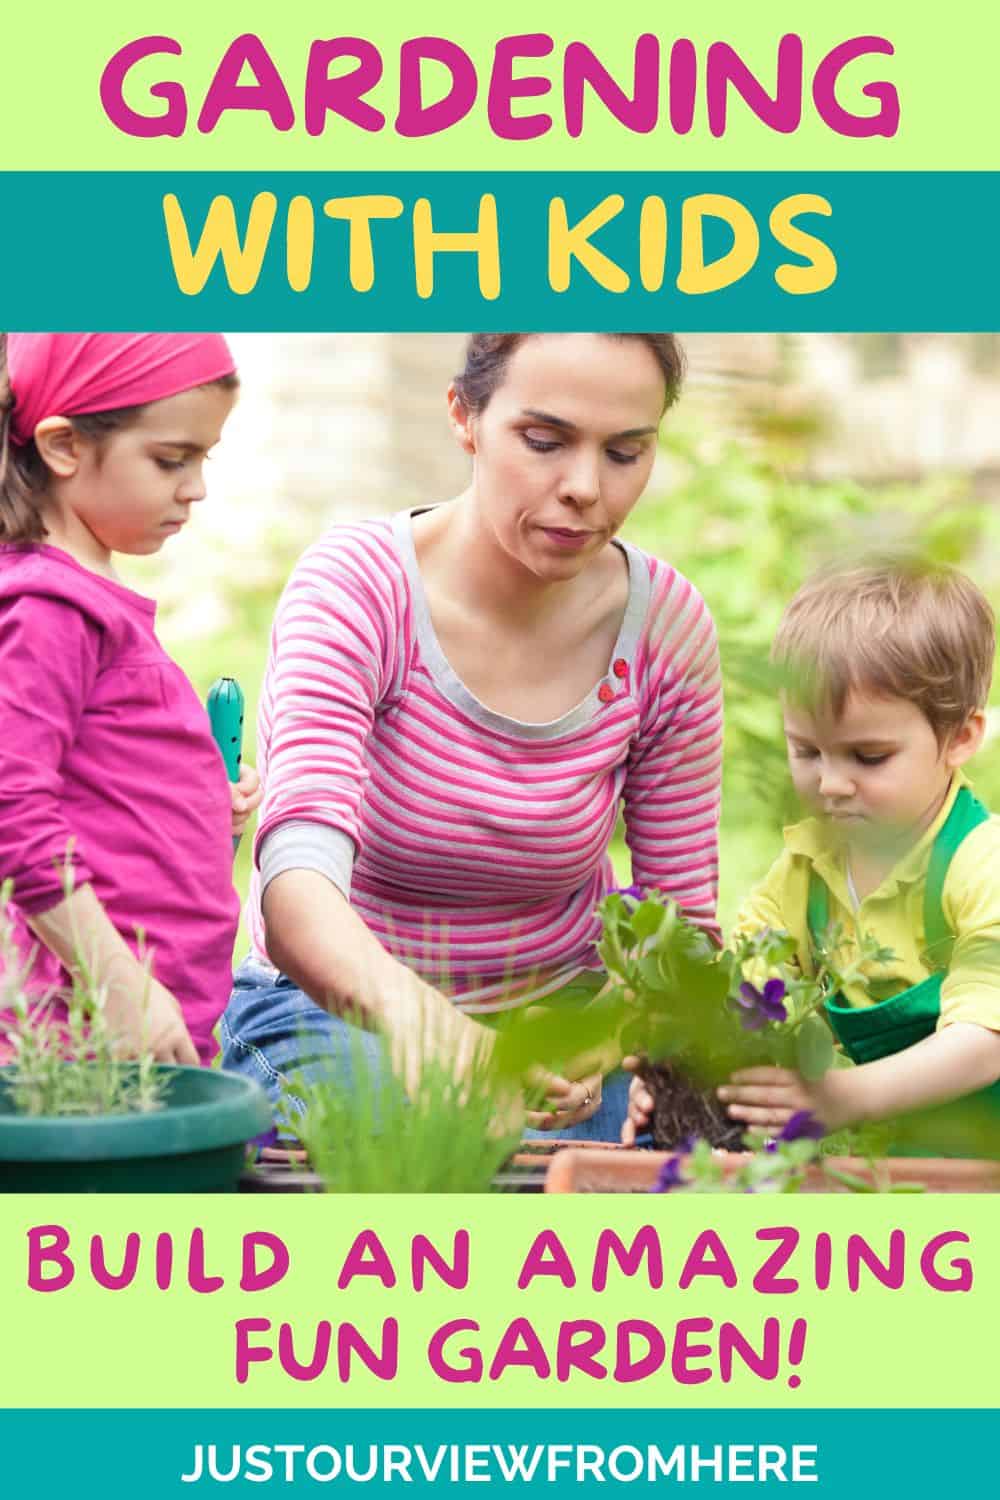 MOM PLANTING A SMALL GARDEN WITH TWO YOUNG KIDS, TEXT OVERLAY GARDENING WITH KIDS, BUILD AN AMAZIN FUN GARDEN